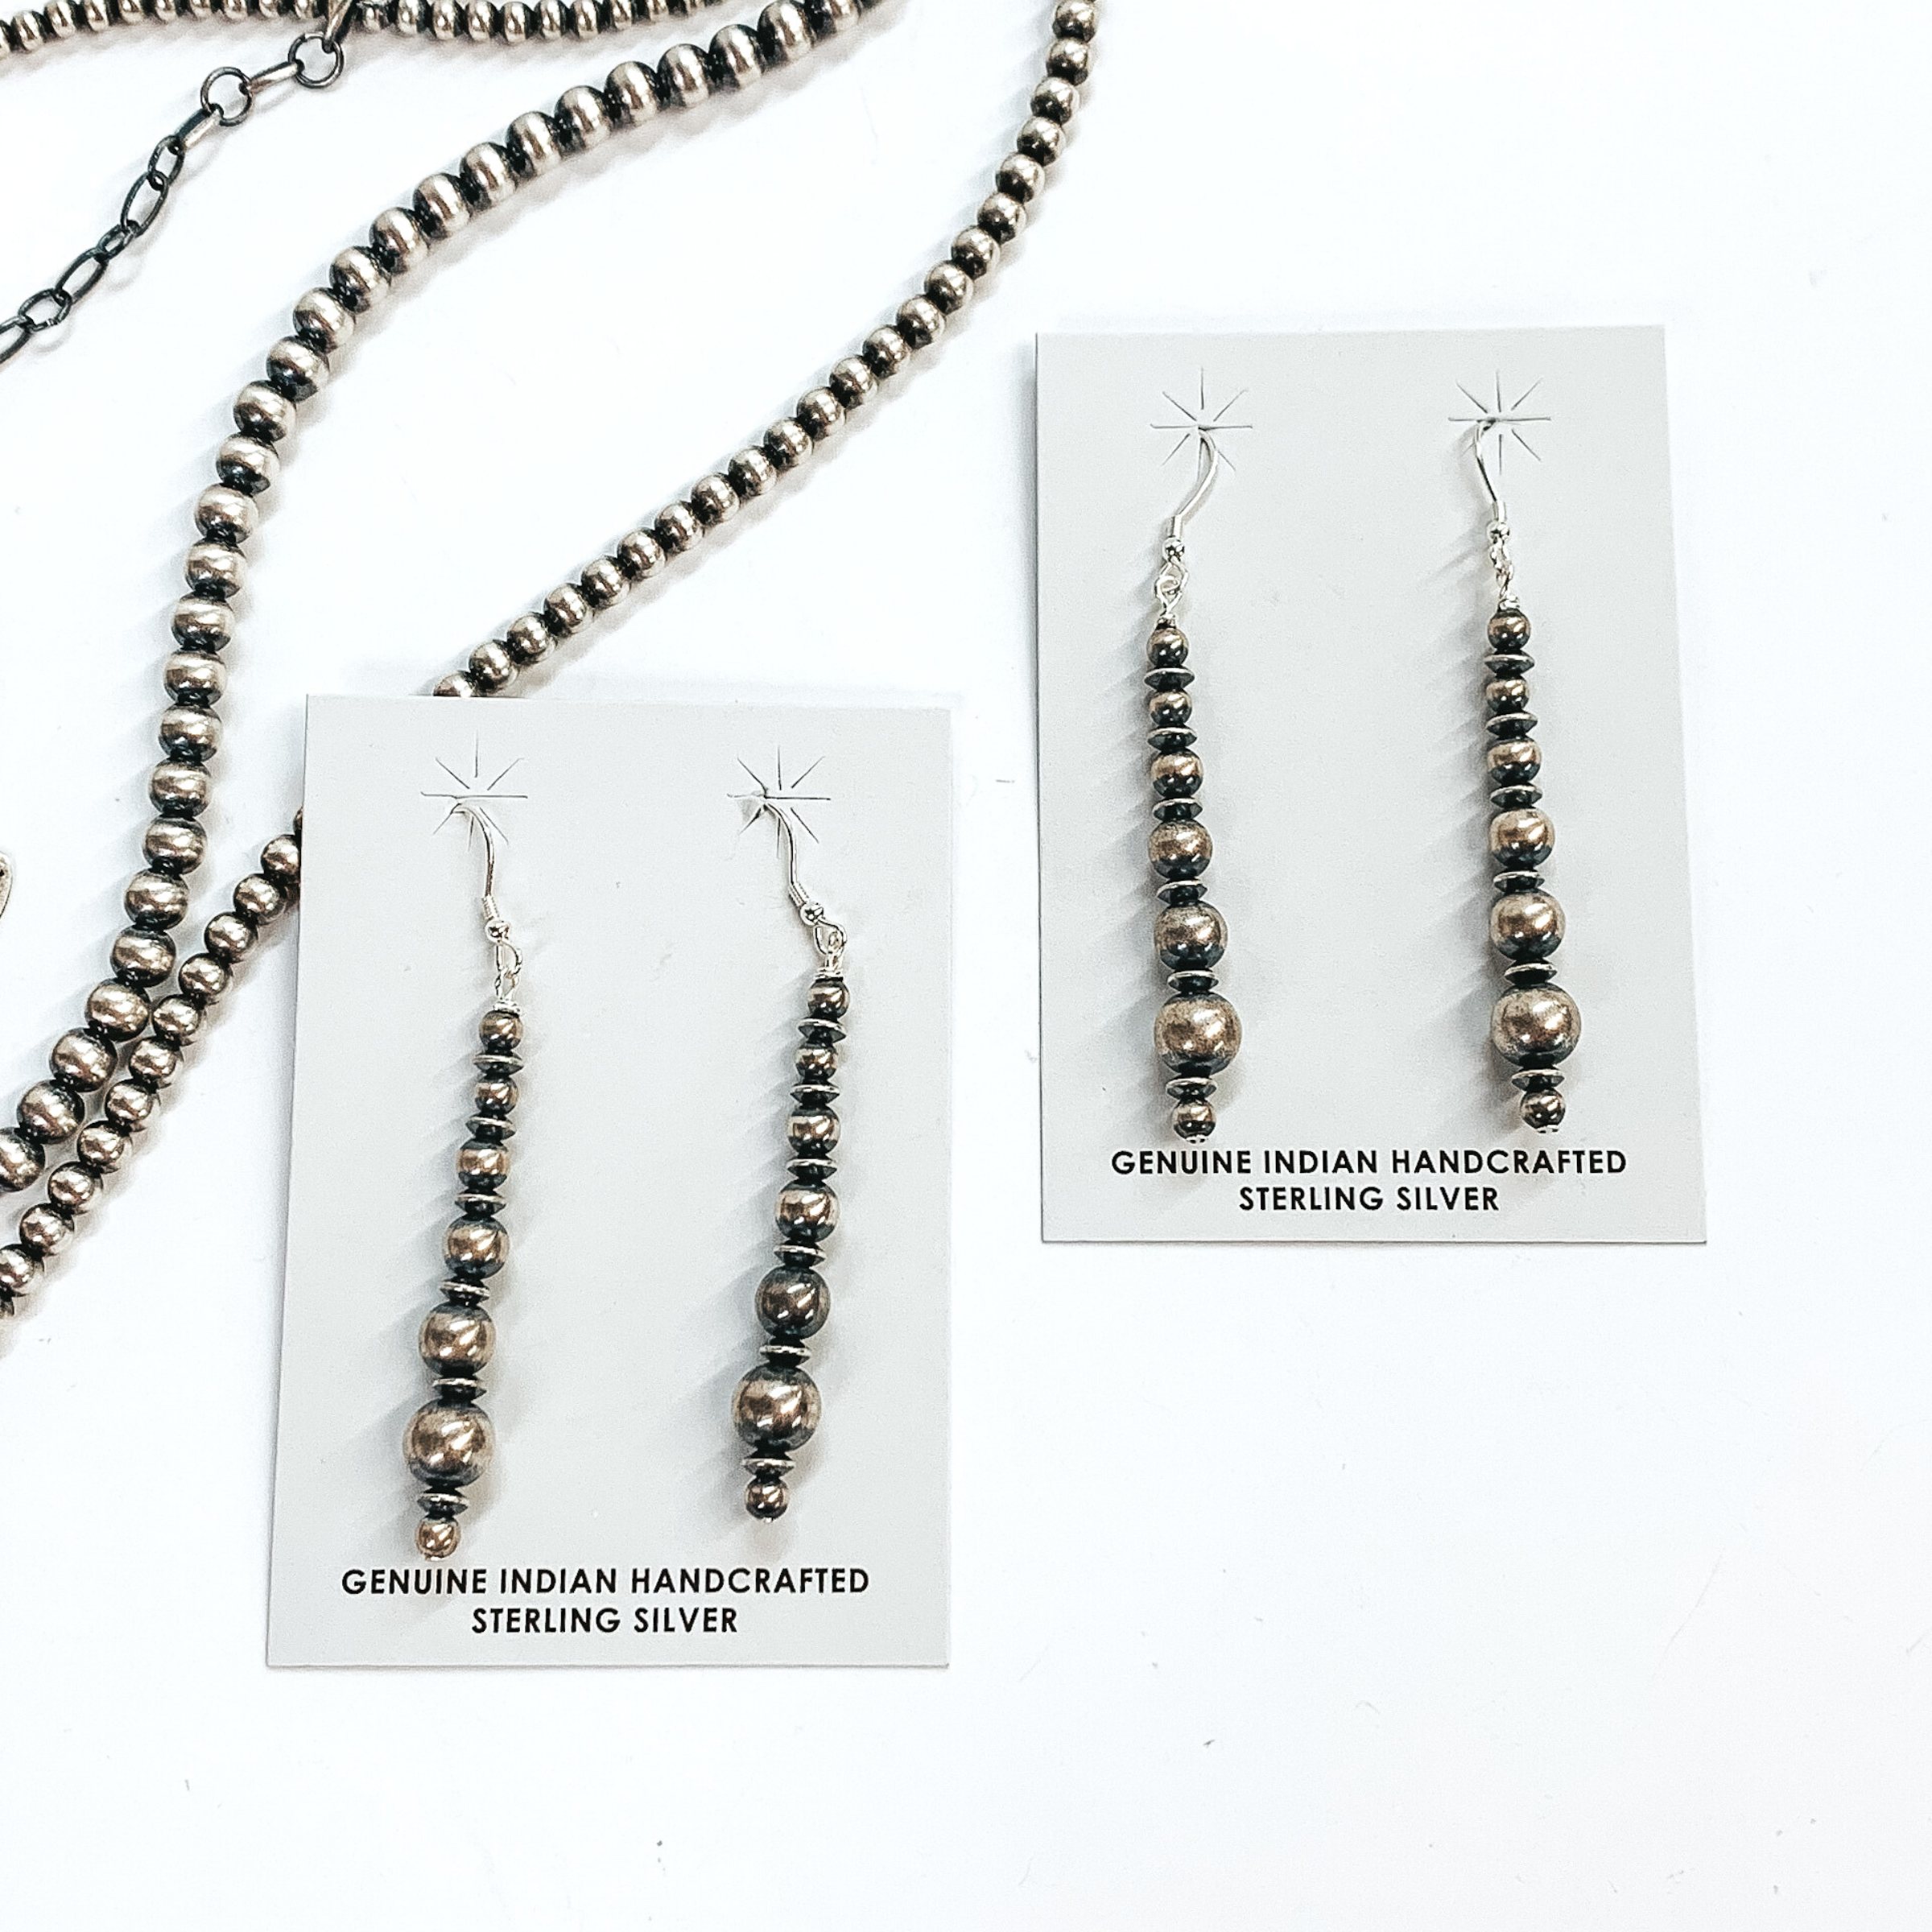 Silver, graduated beads and saucer beaded drop earrings. These earrings are pictured on a white background on top of silver beads. 